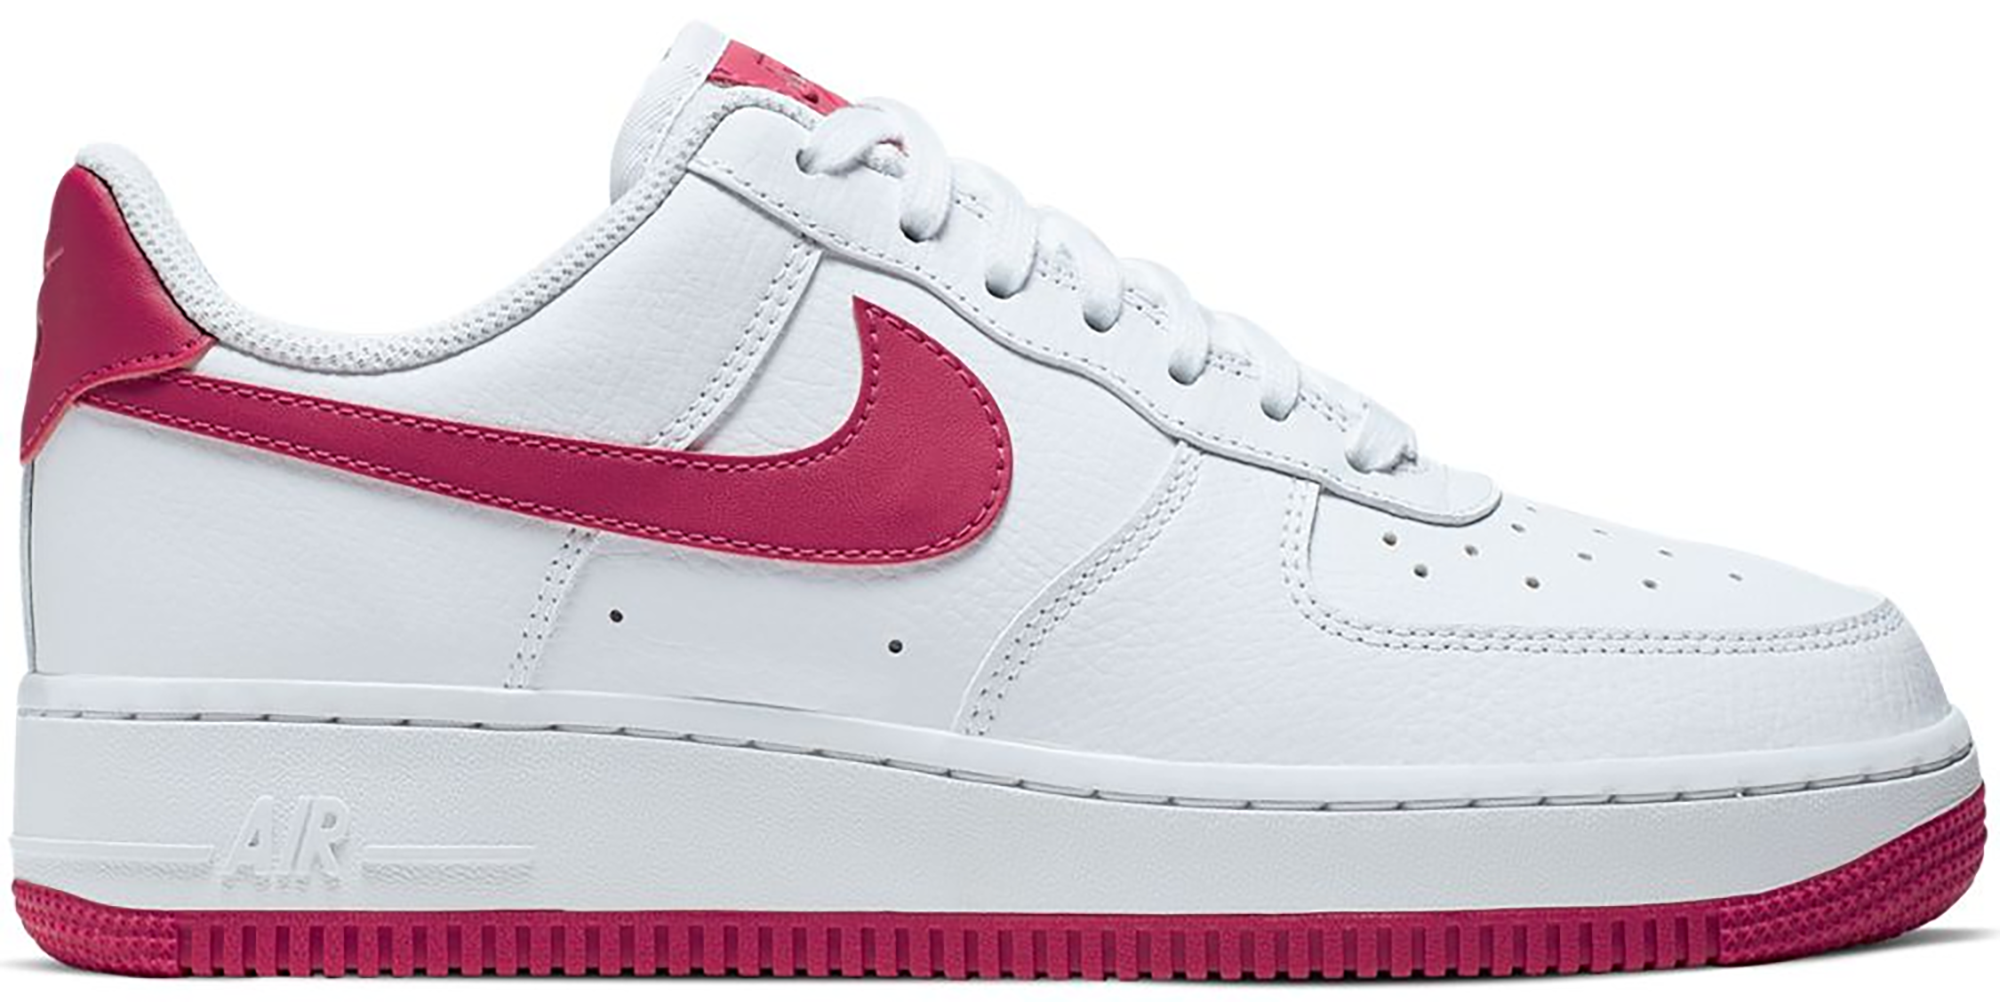 Nike Air Force 1 Low White Wild Cherry 